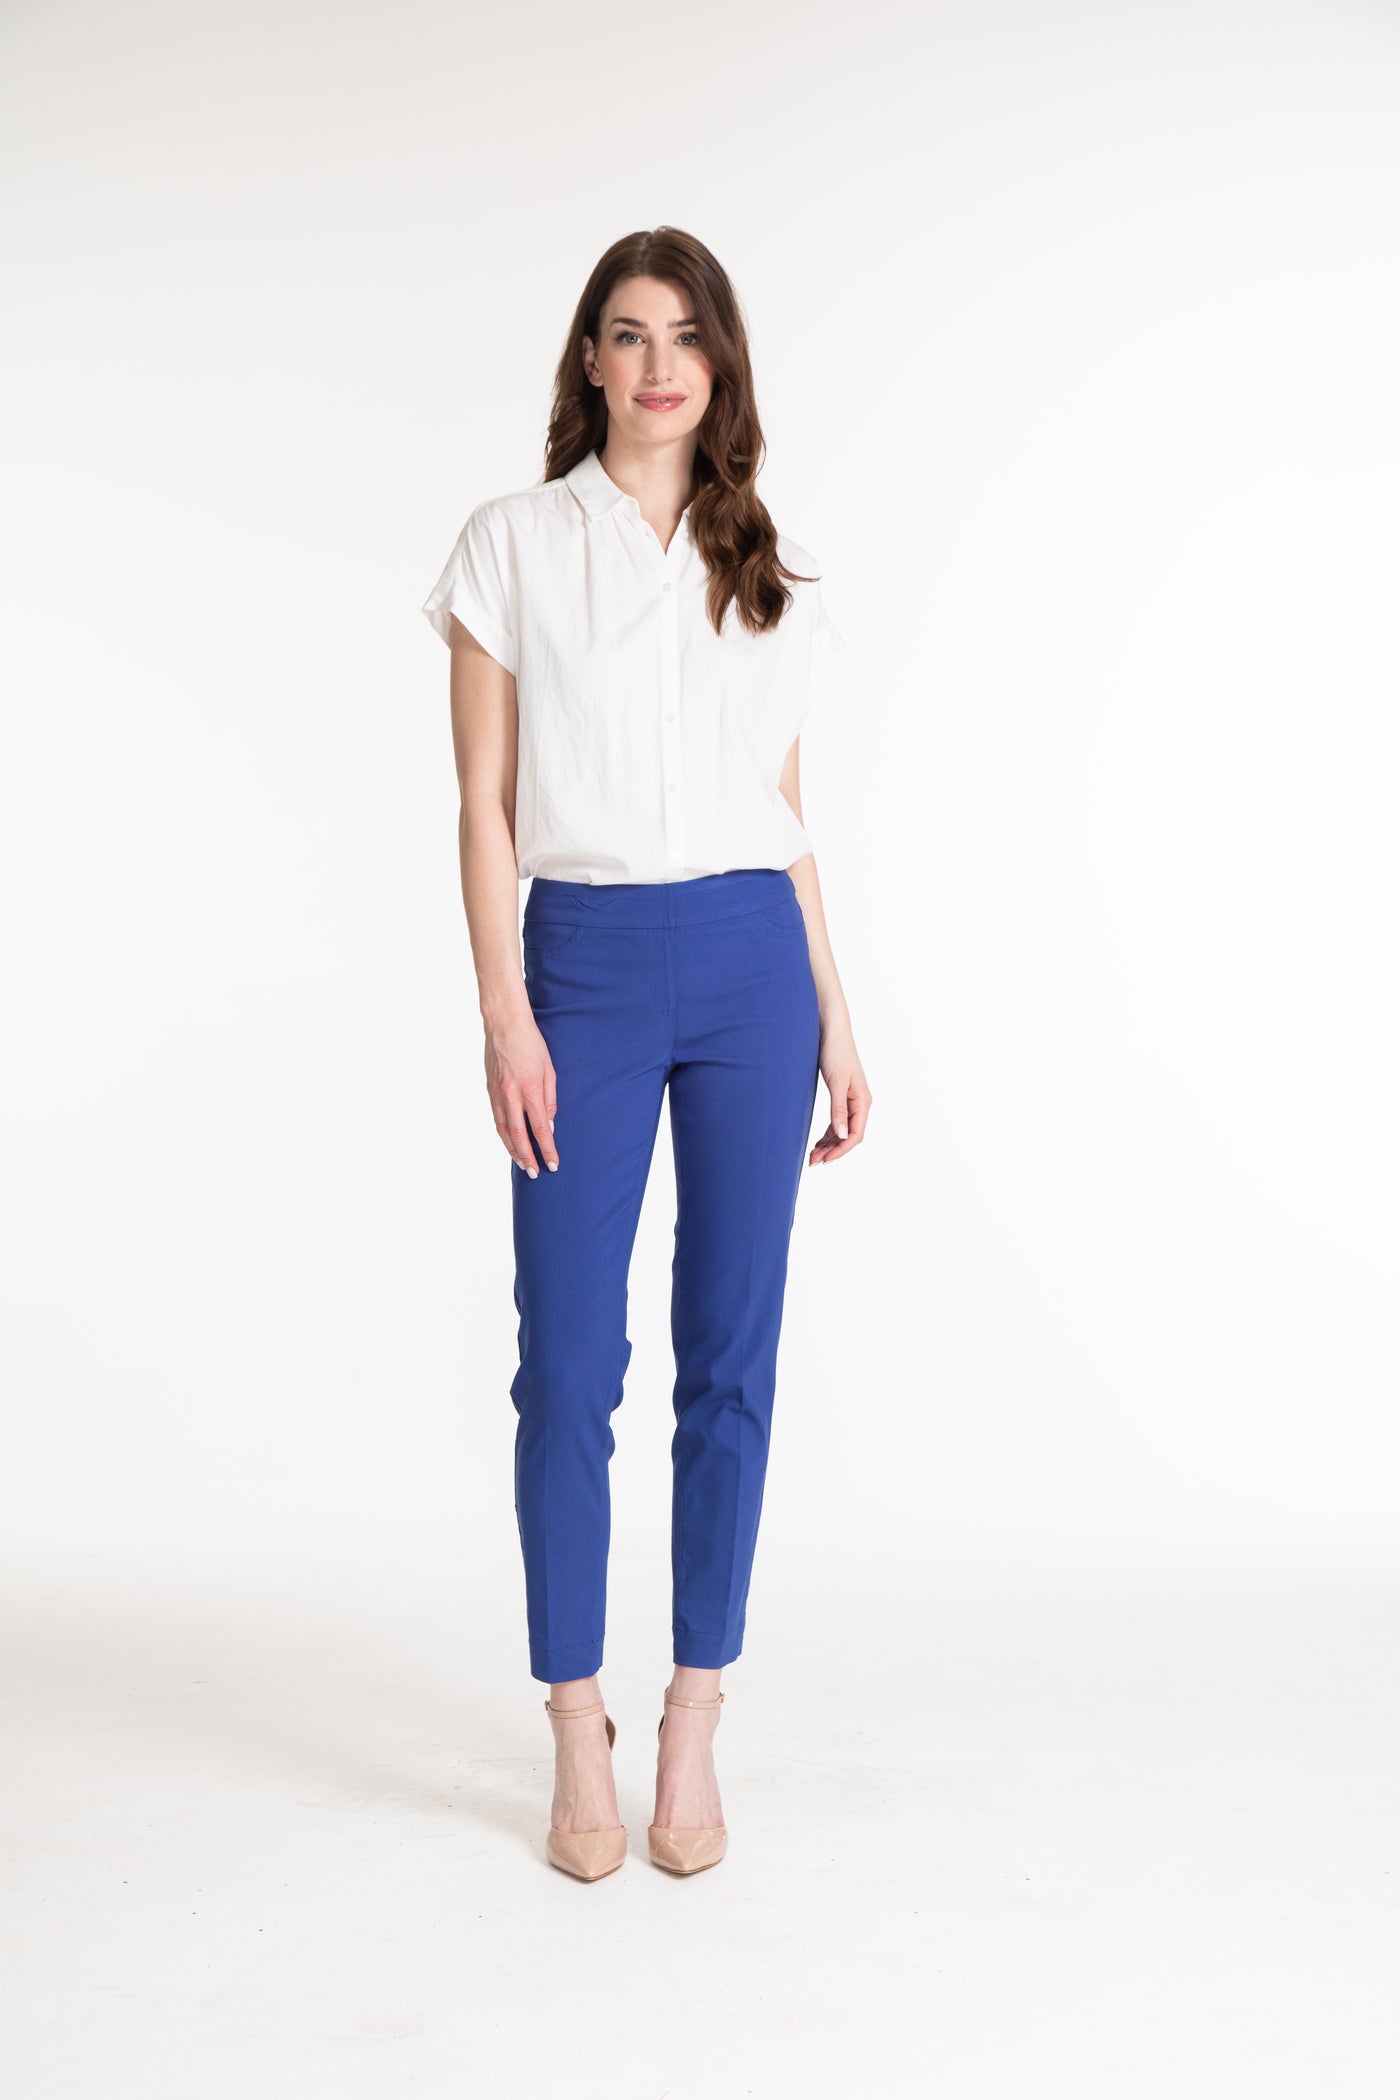 PULL-ON ANKLE PANT - Blueberry